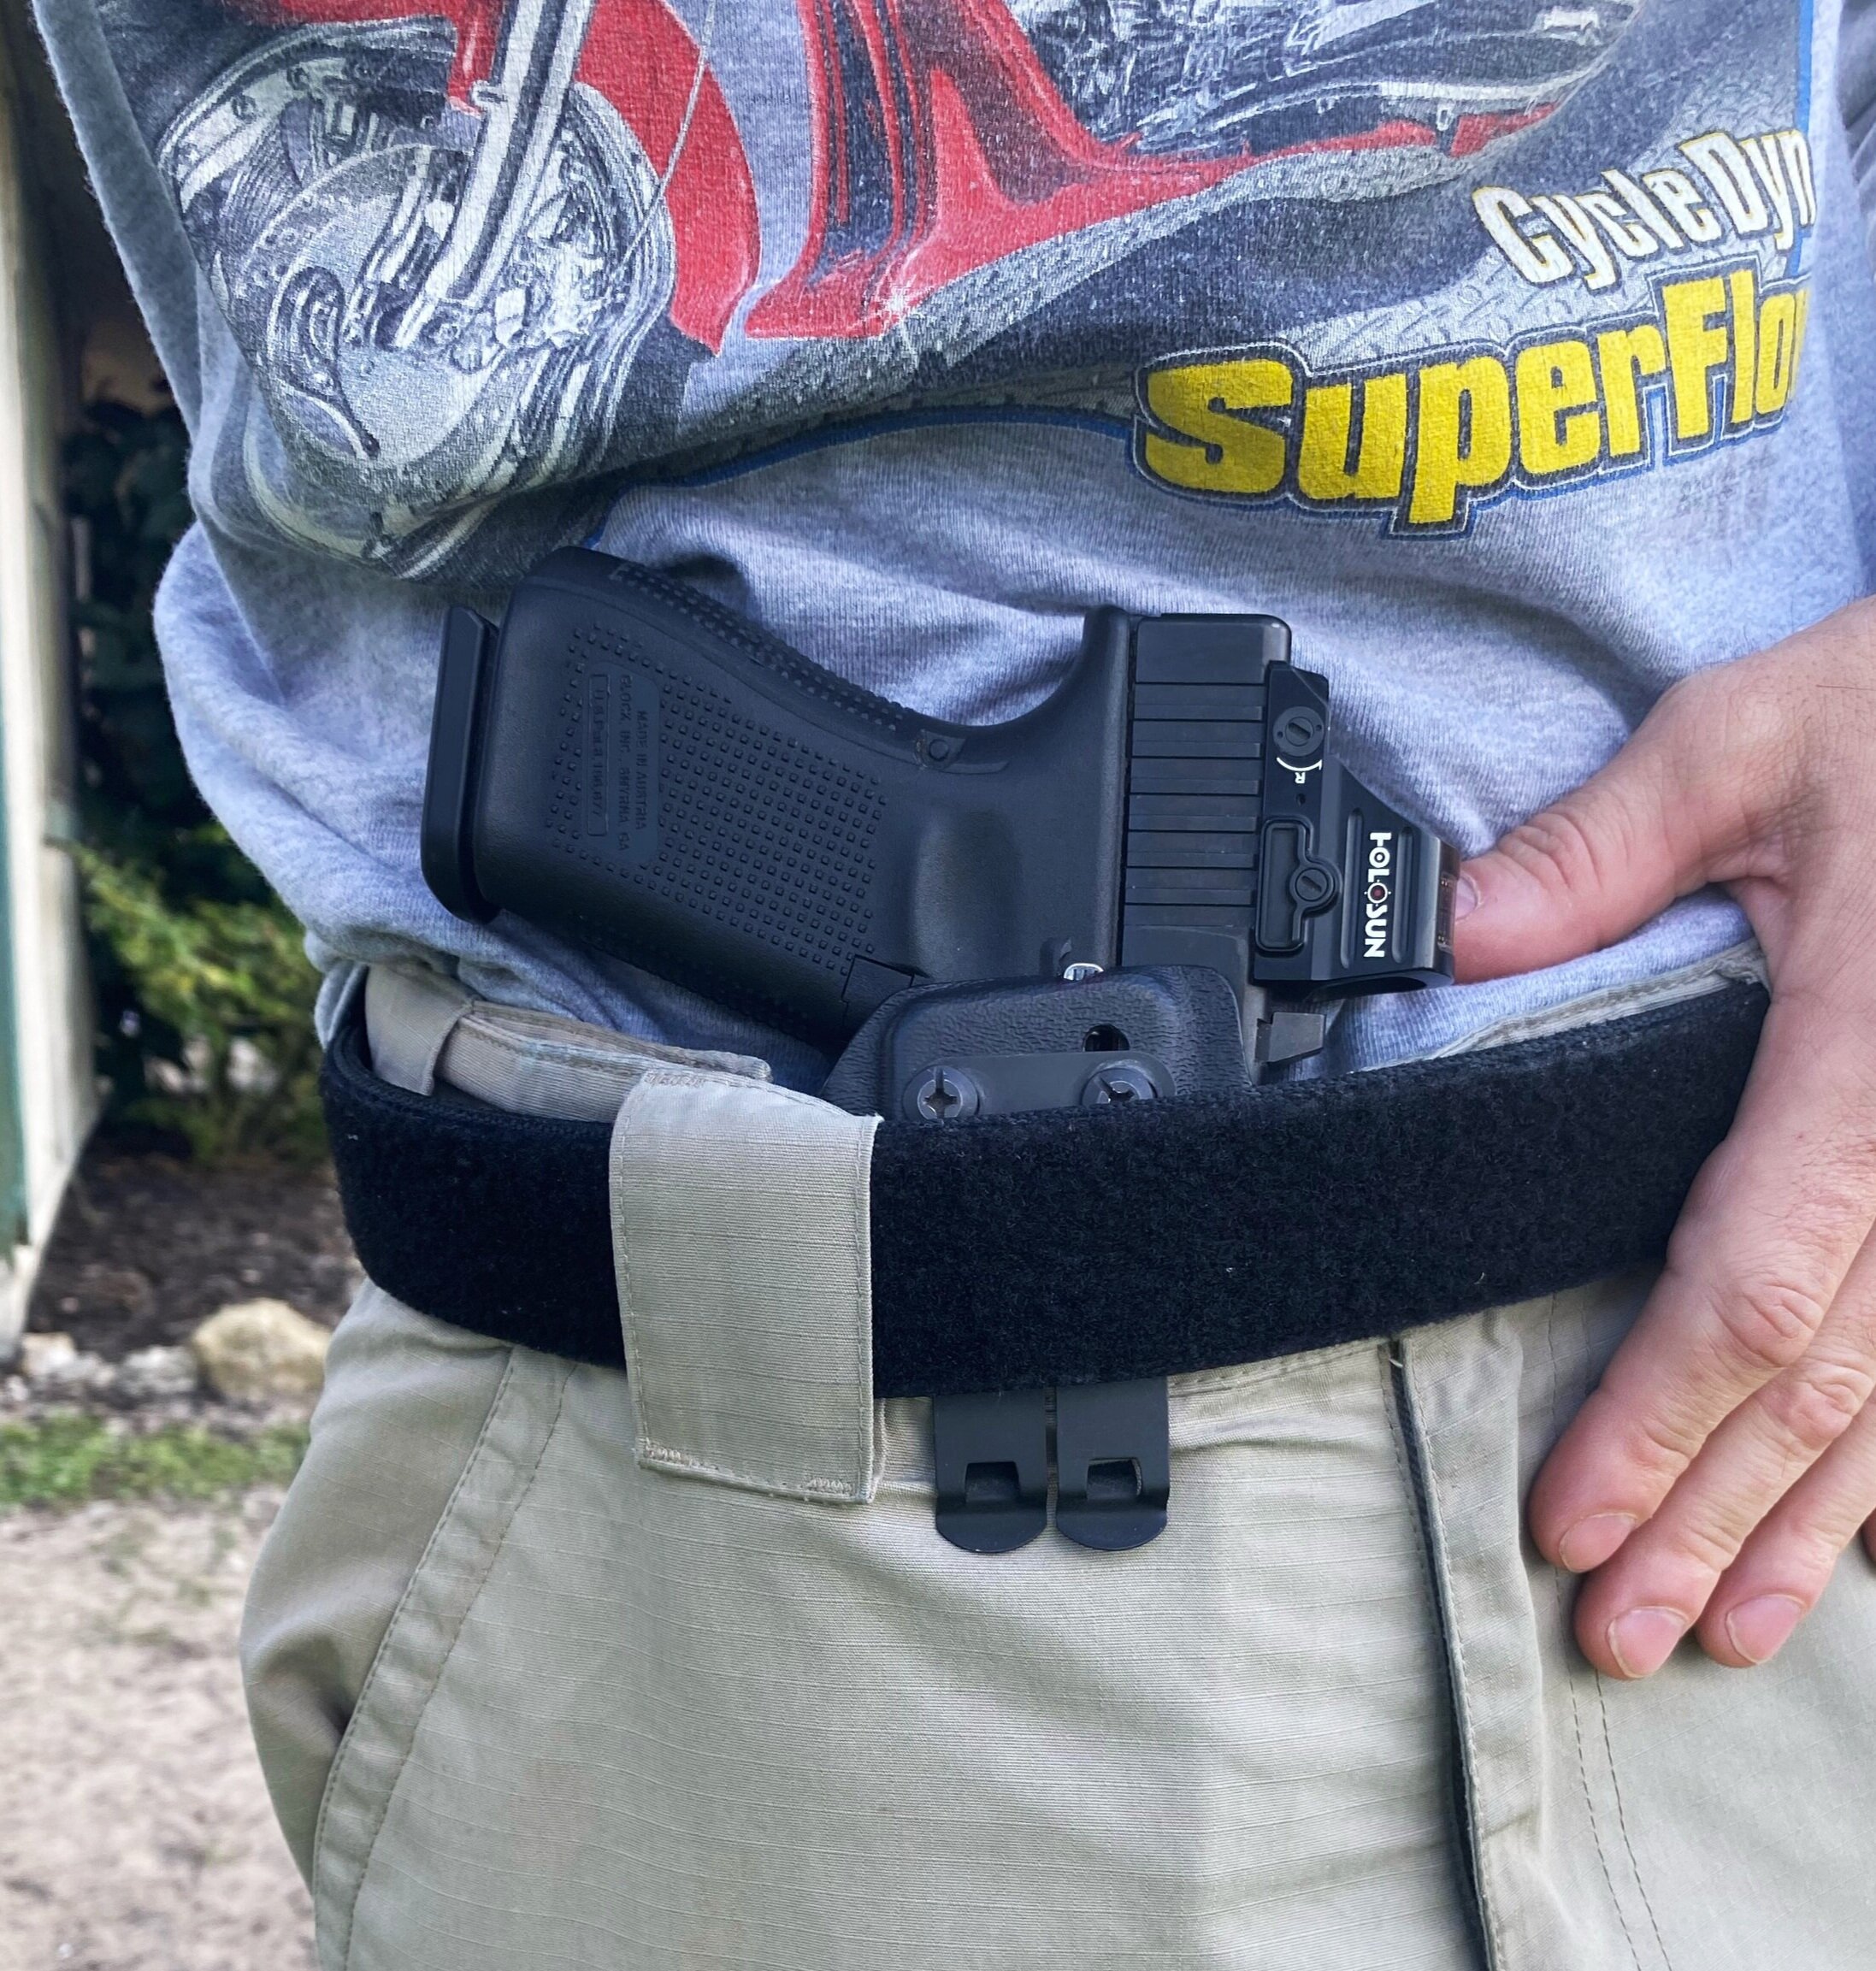 Discreet Carry Concepts Clips: Are They Really Worth It?